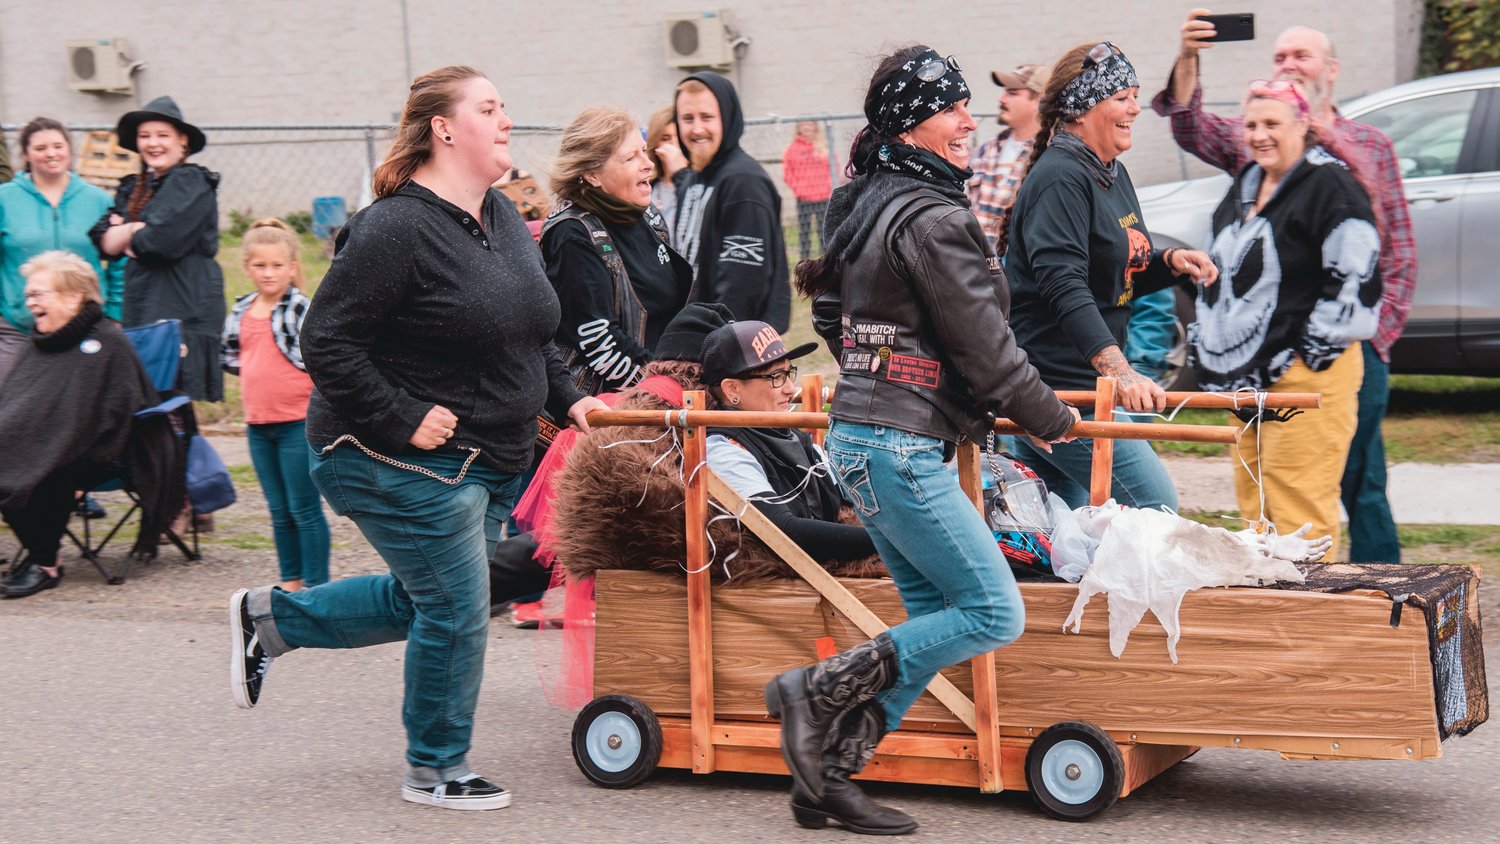 The Litas roll with their pine box during Casket Races Saturday afternoon in Boo-coda.